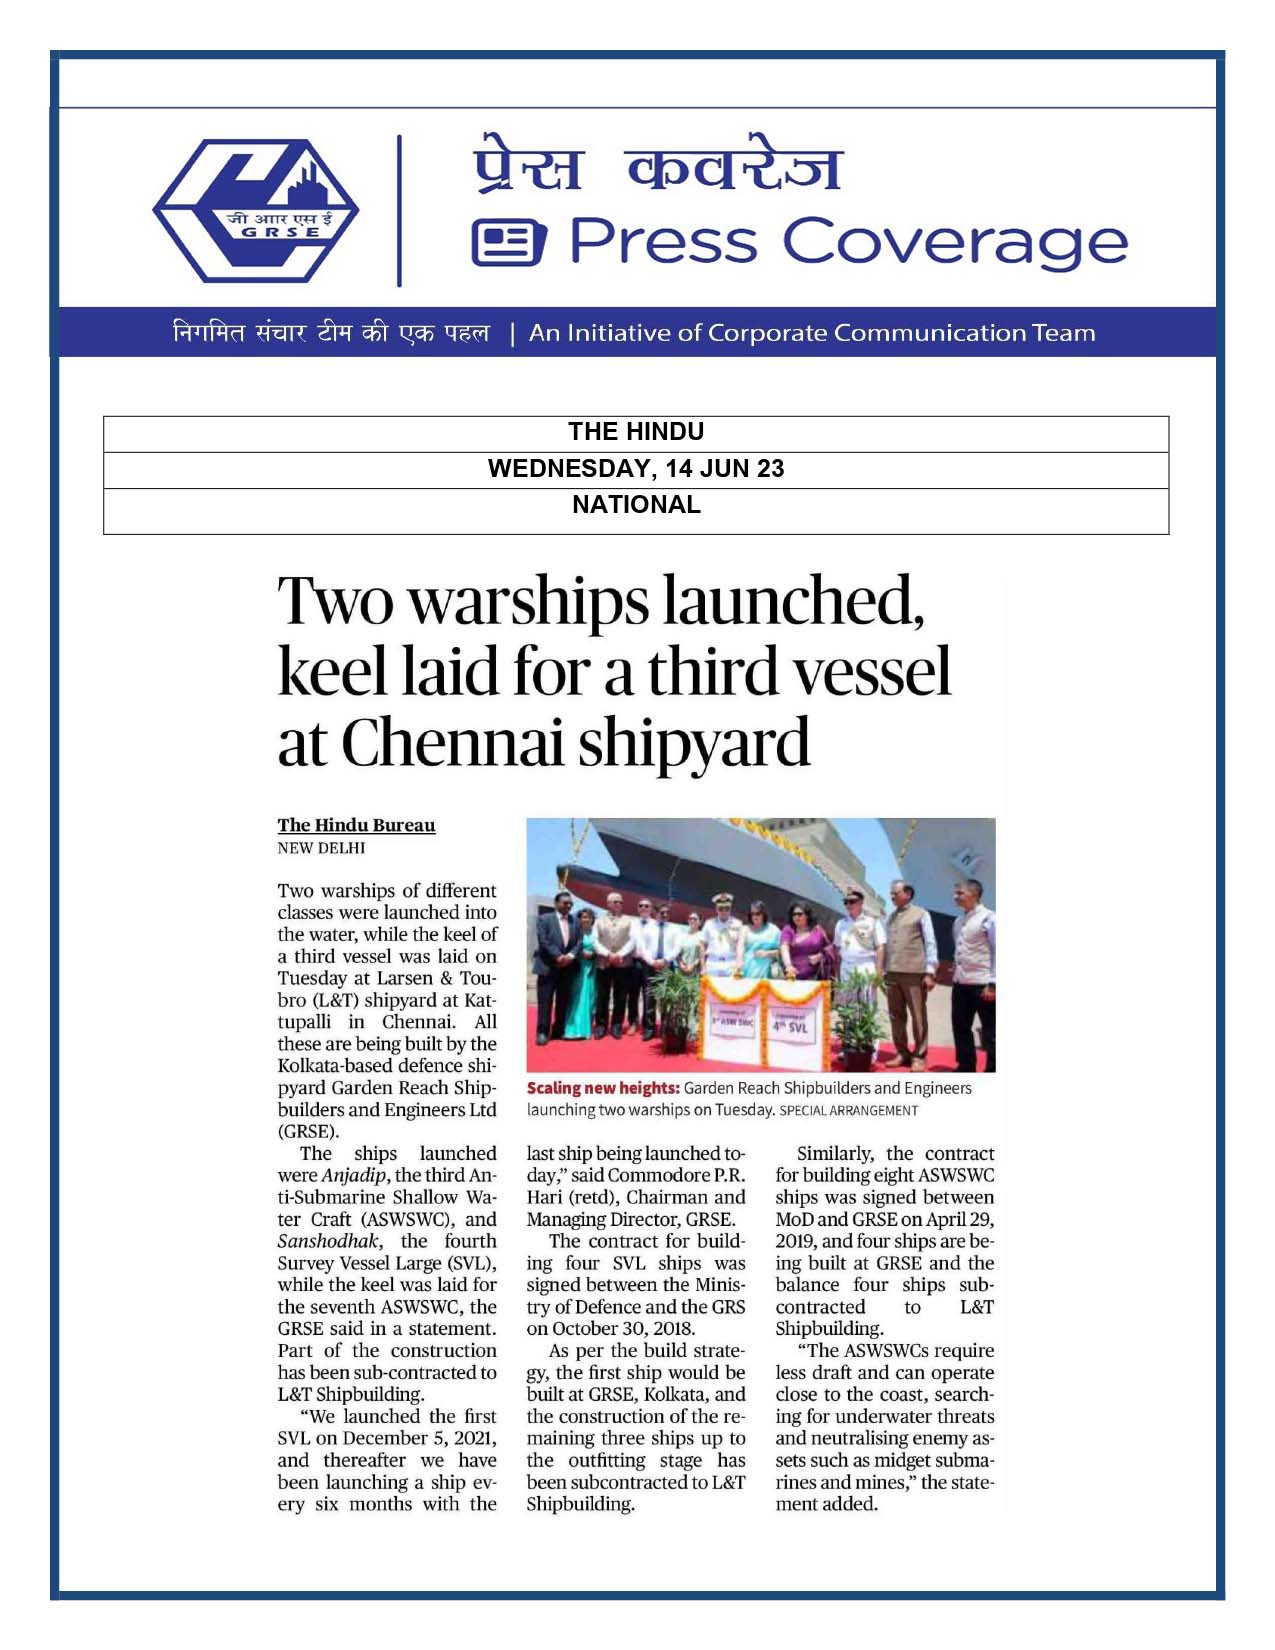 Two warships launched, keel laid for a third vessel at Chennai Shipyard